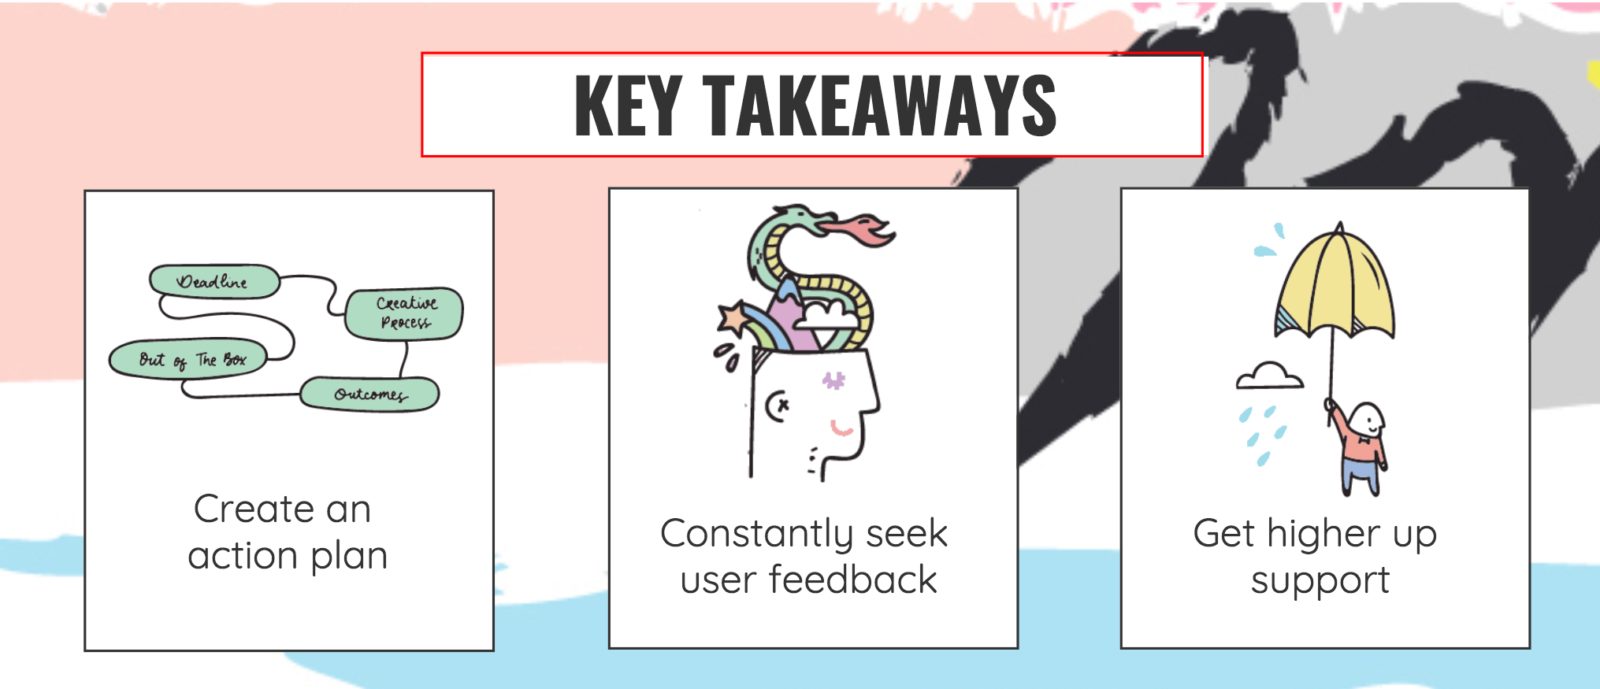 key takeaways. one, create an action plan. two, constantly seek feedback. three, get higher up support.